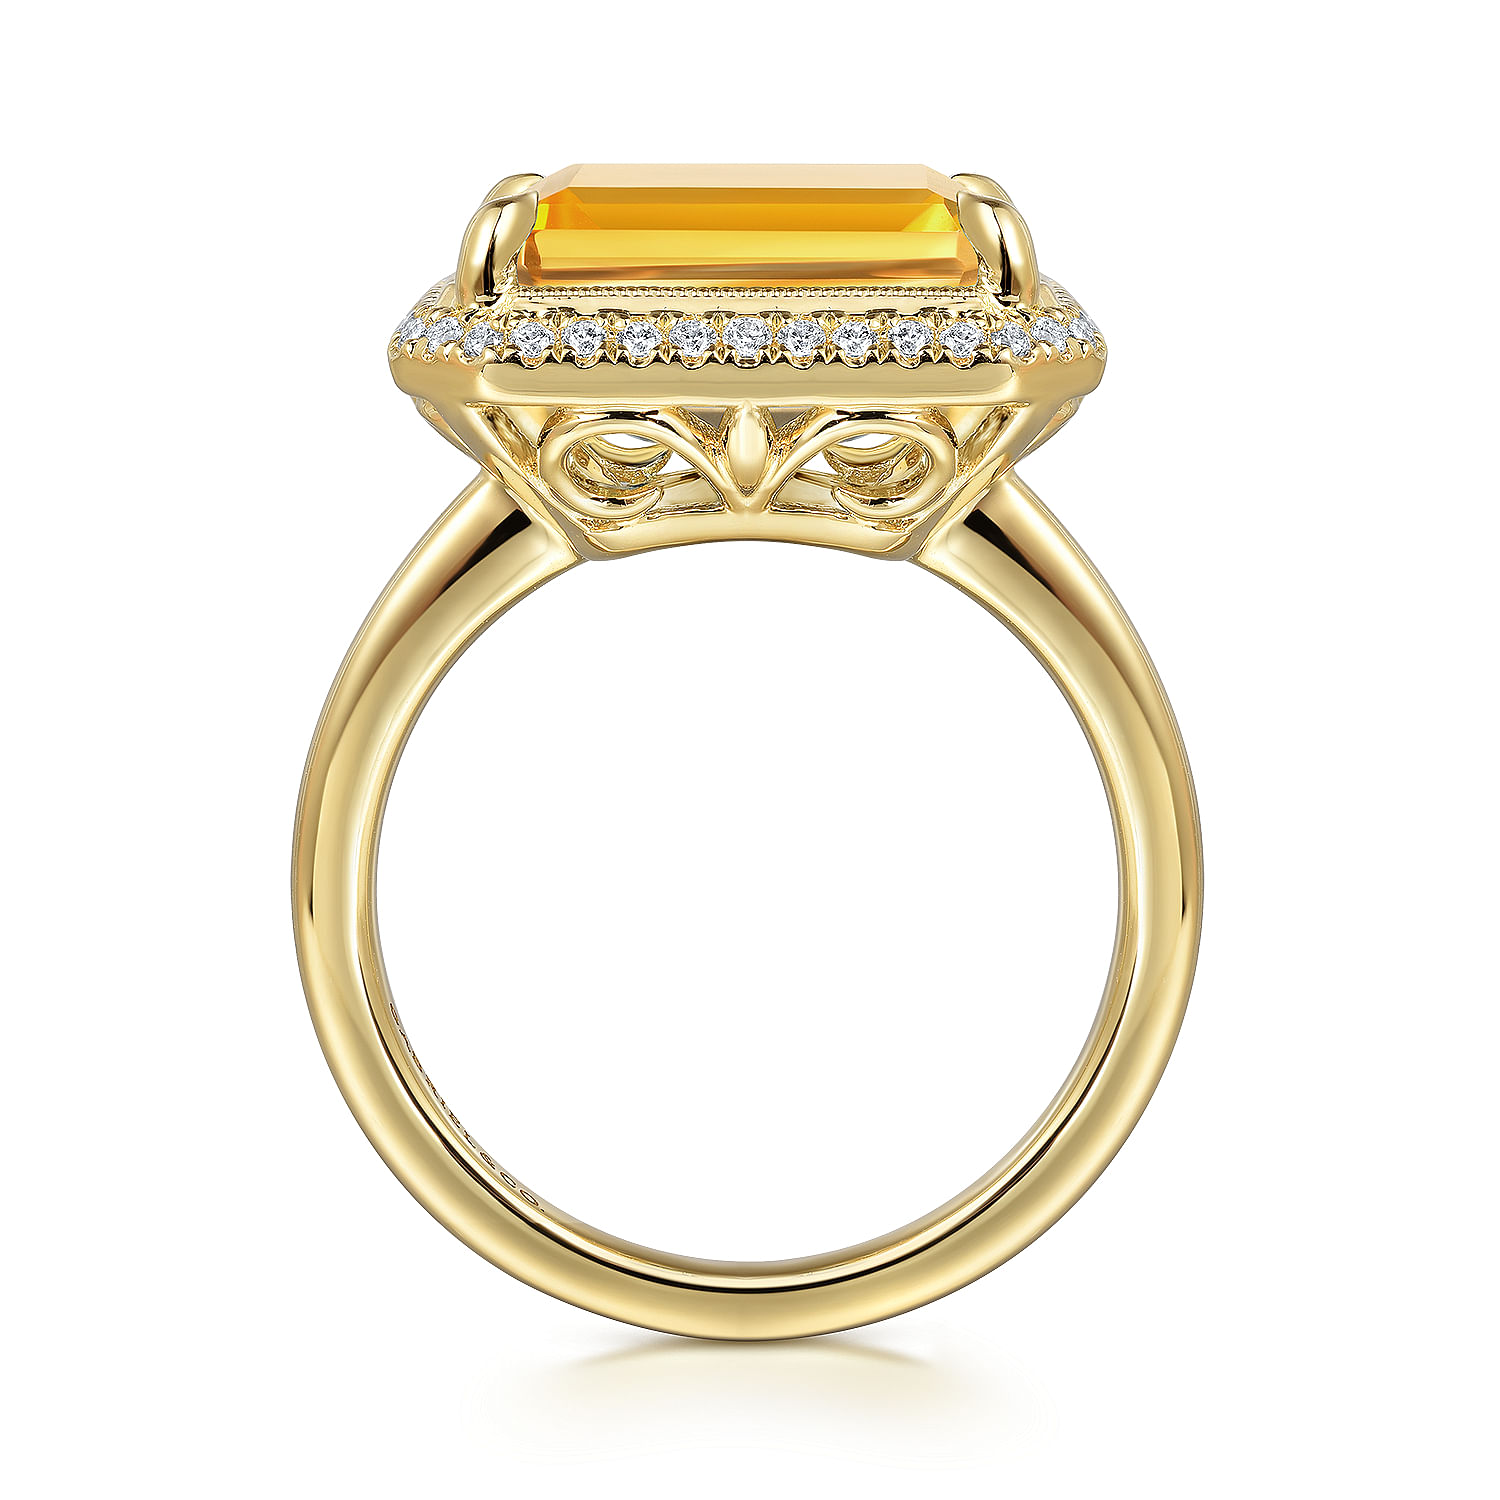 14K Yellow Gold Diamond and Citrine Emerald Cut Ladies Ring With Flower Pattern Gallery